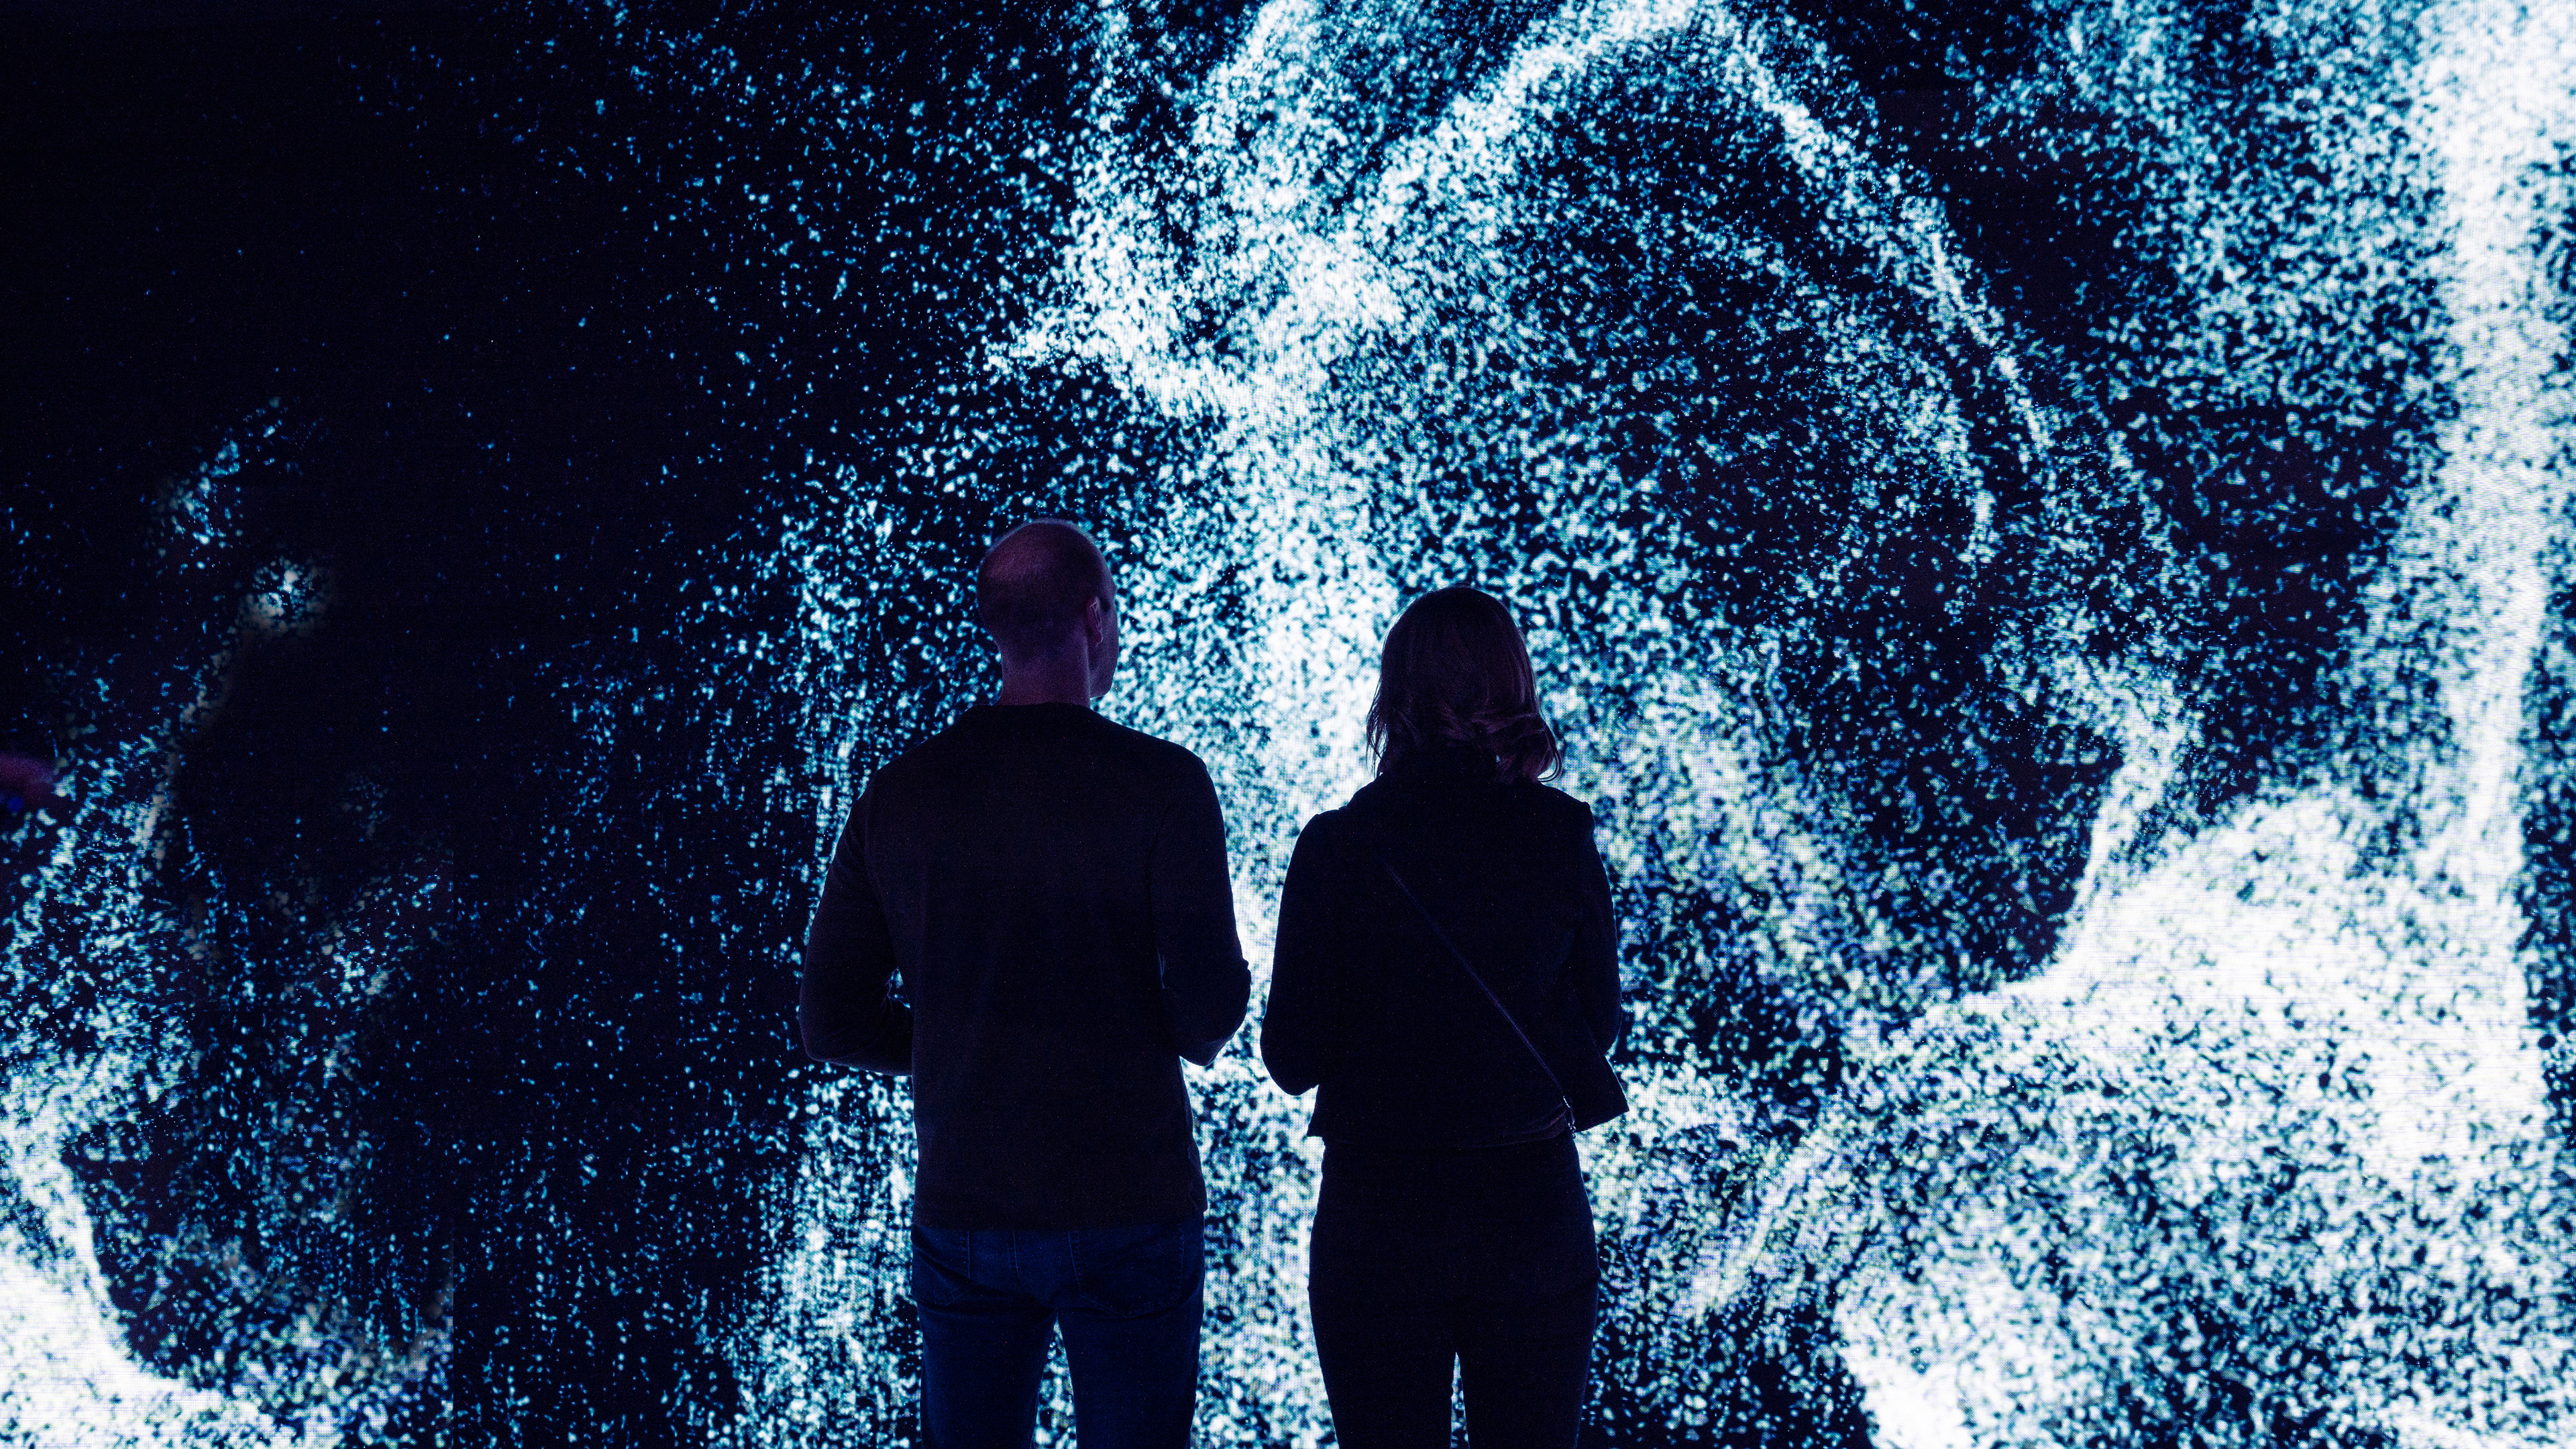 Two people standing in front of a large led wall filled with generative steam particles